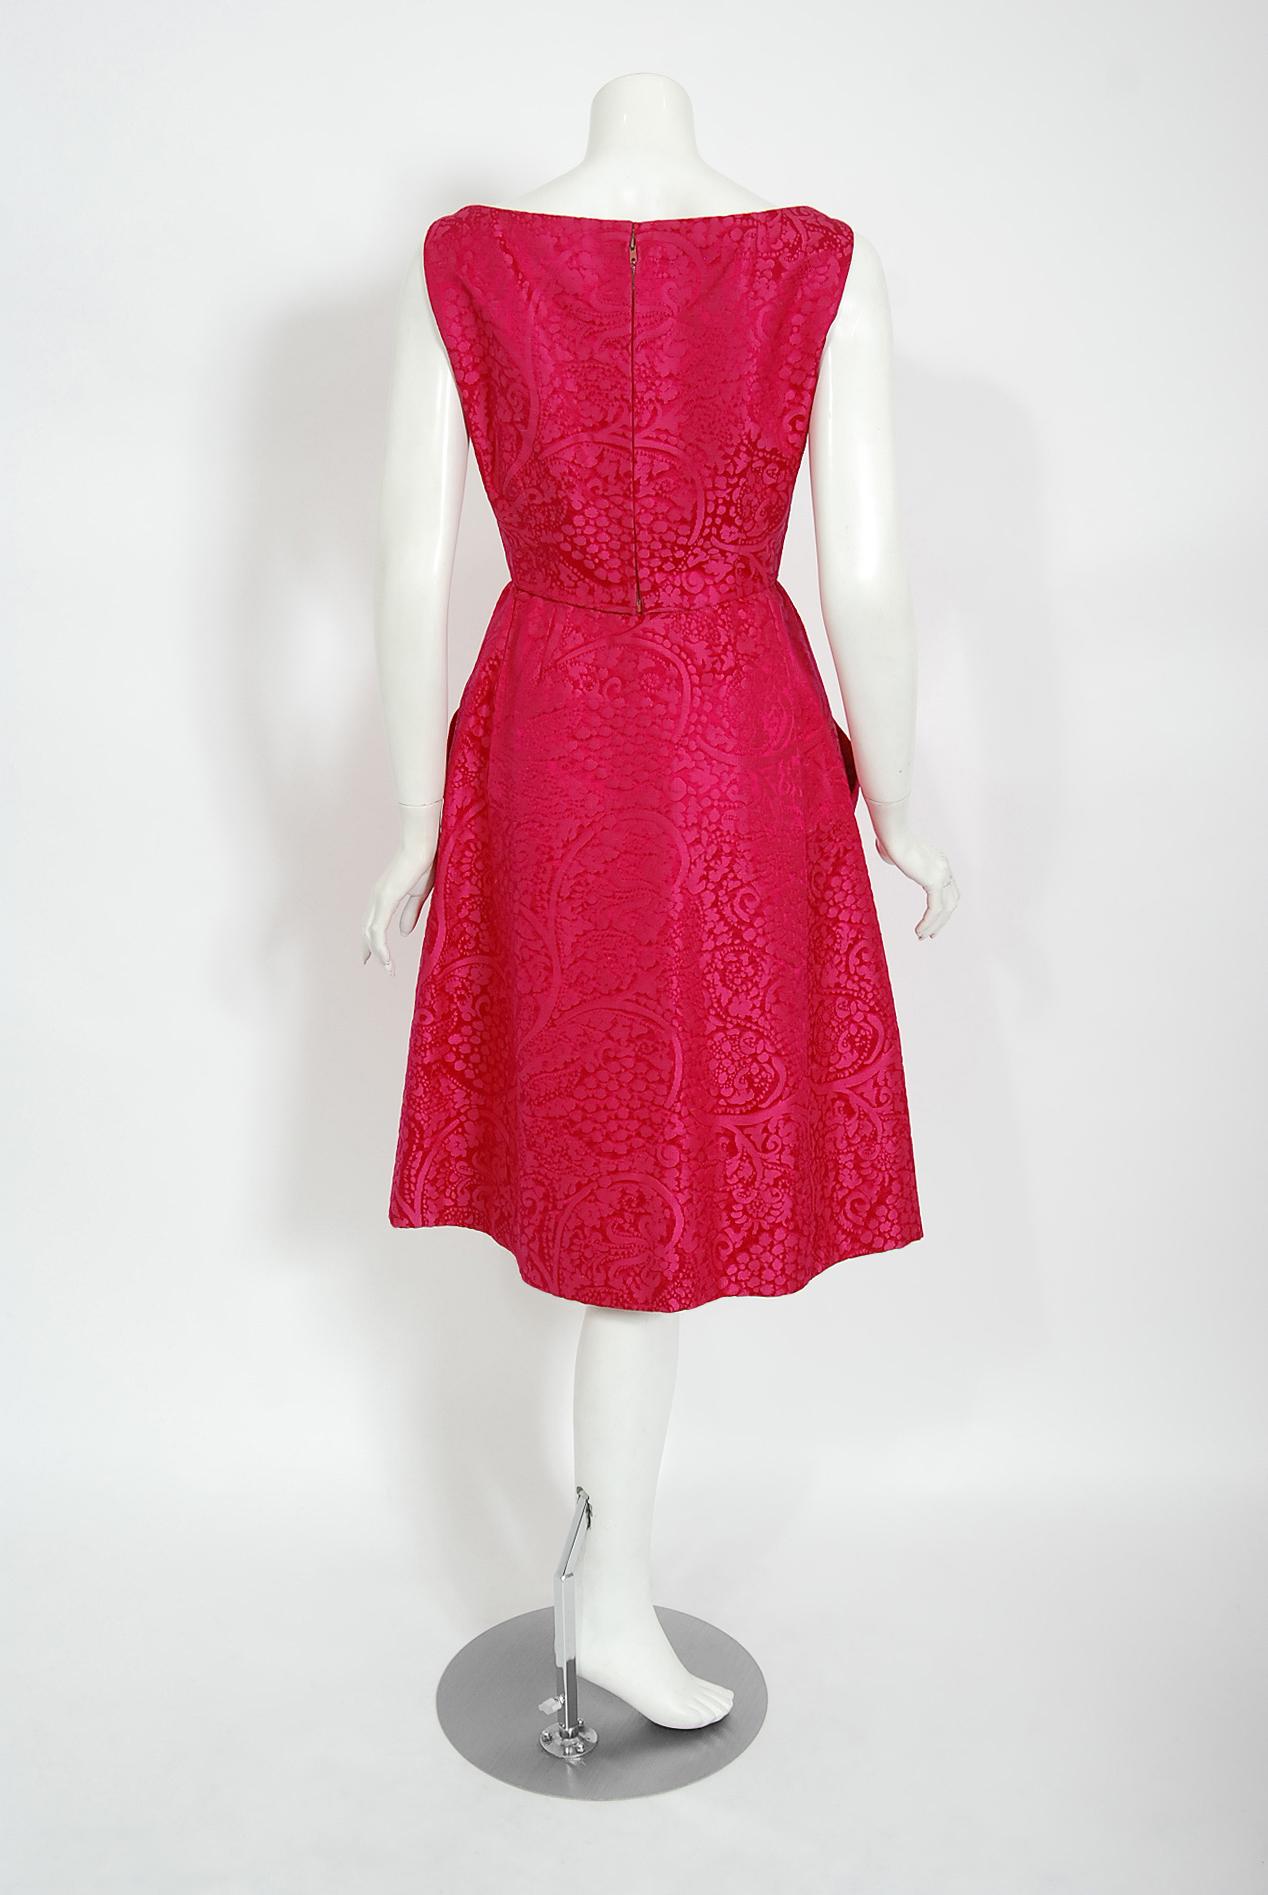 Vintage 1962 Christian Dior Haute Couture Pink Textured Silk Dress & Bow Jacket 2